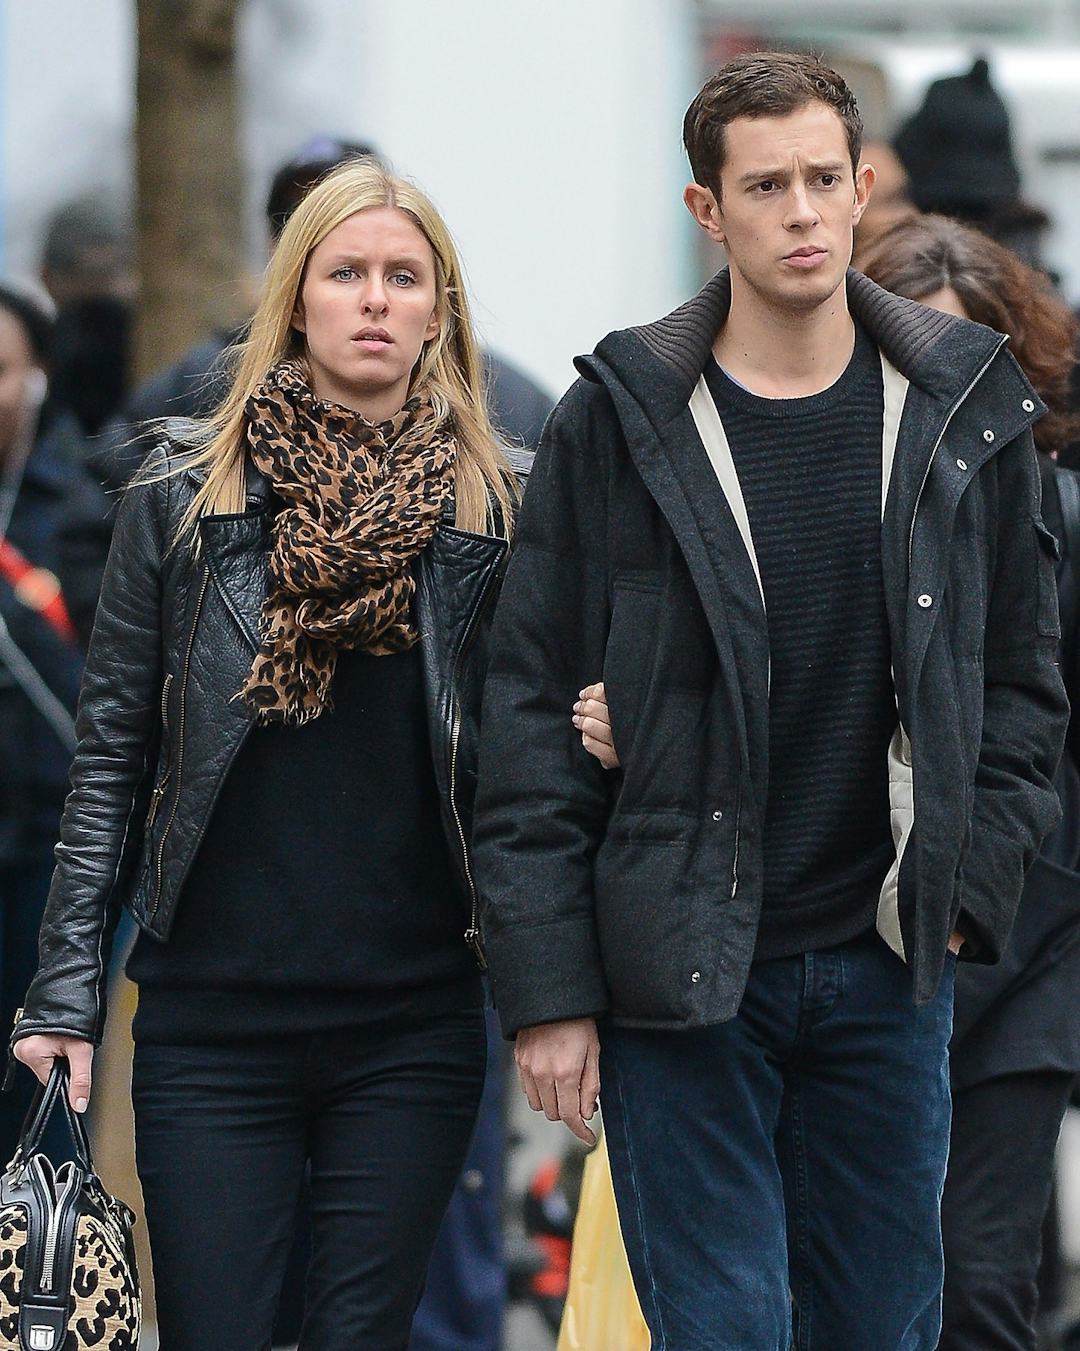 Who Is James Rothschild, Nicky Hilton's Husband? The Duo Is Expecting A